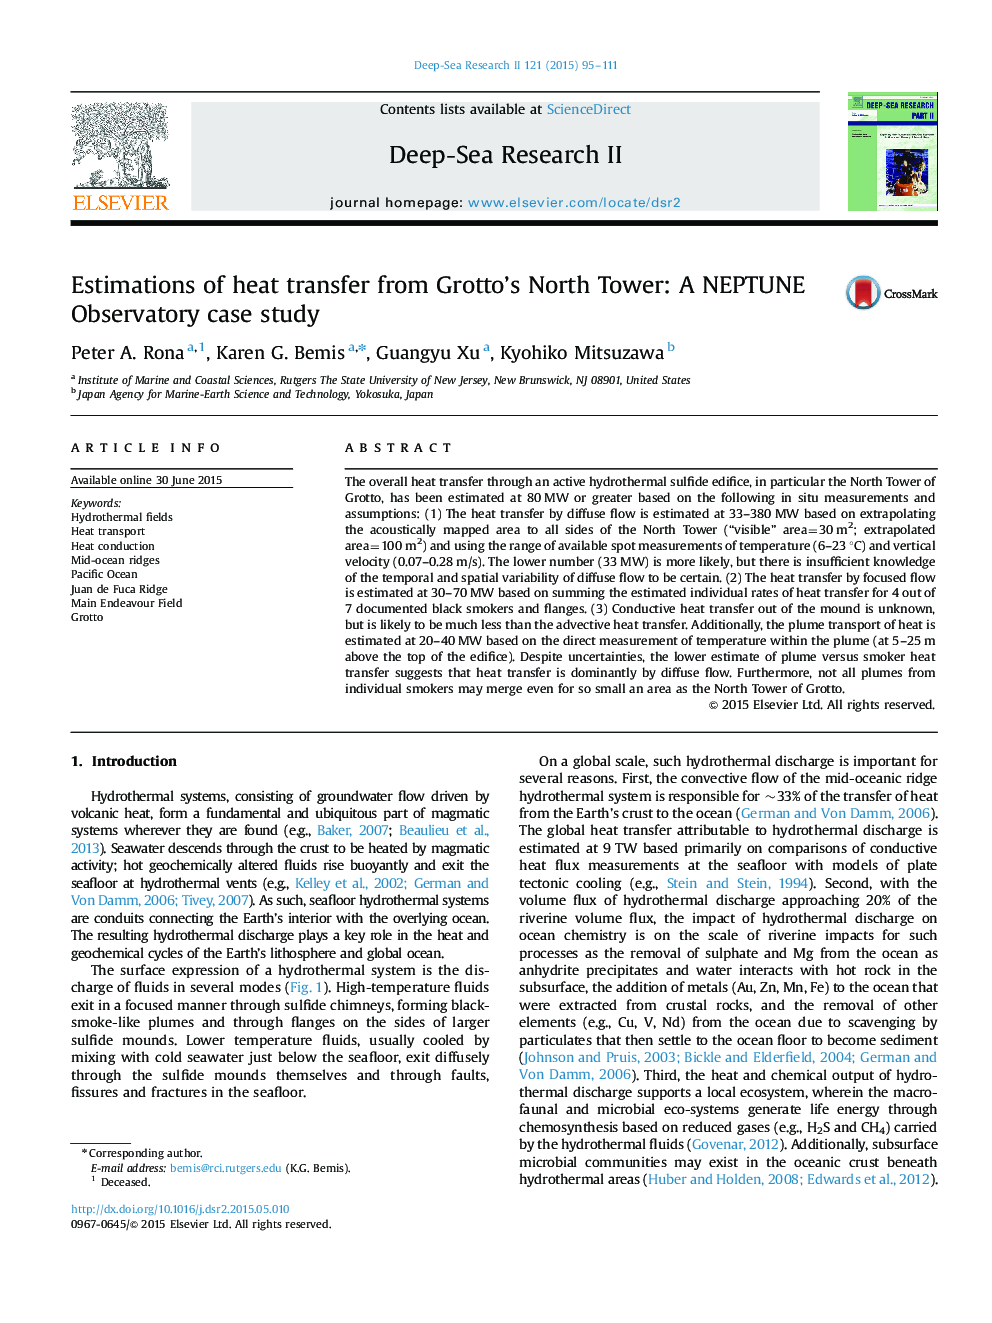 Estimations of heat transfer from Grotto's North Tower: A NEPTUNE Observatory case study